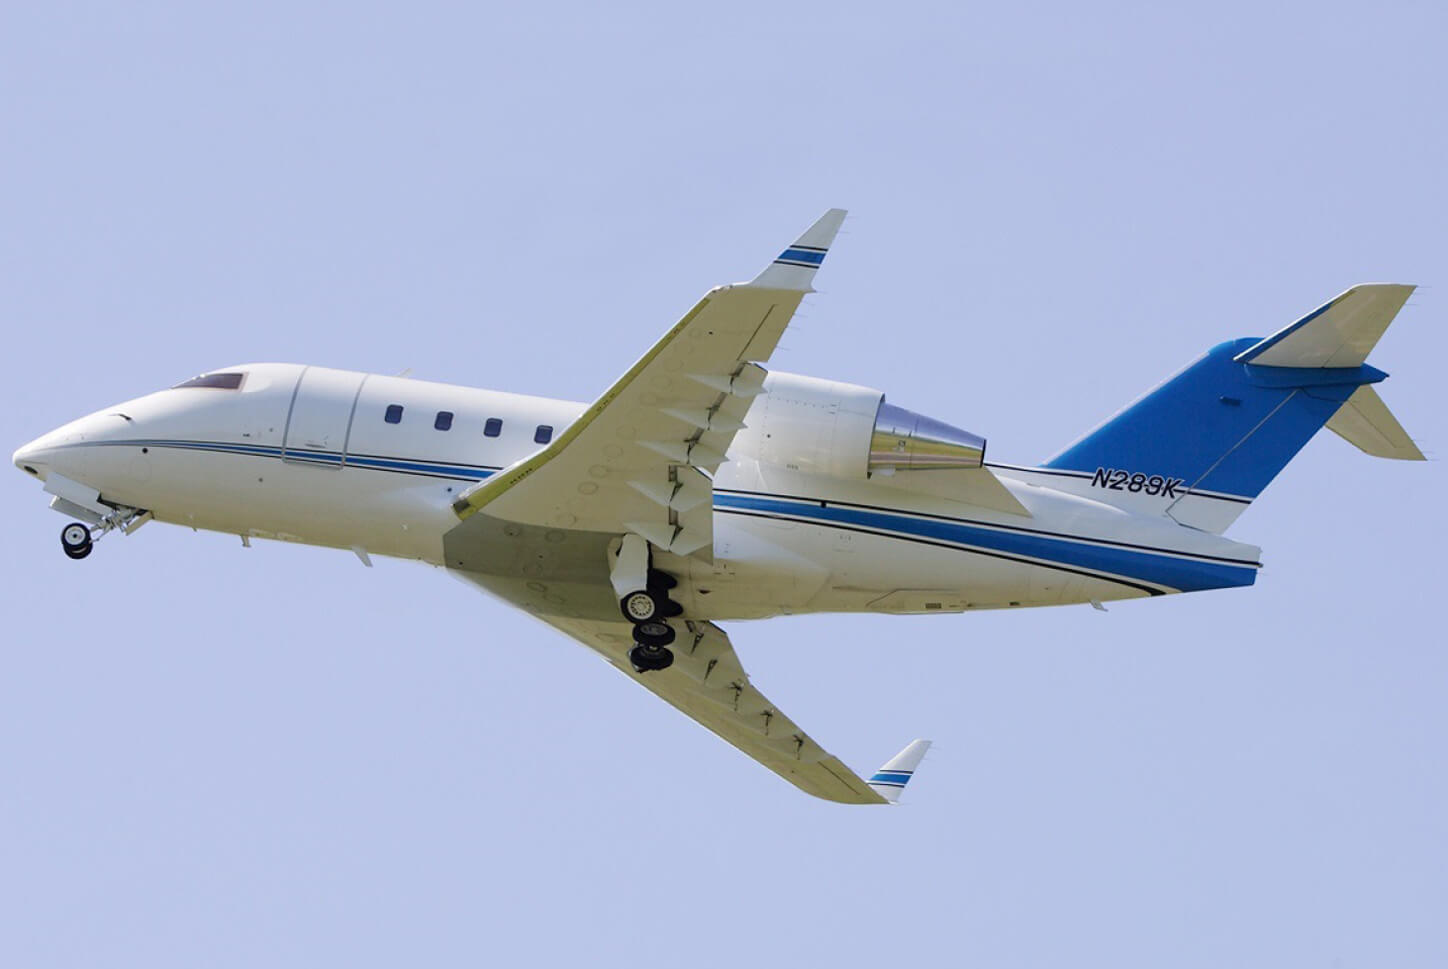 A Cl601 Model in Air With Shot taken From Ground Level